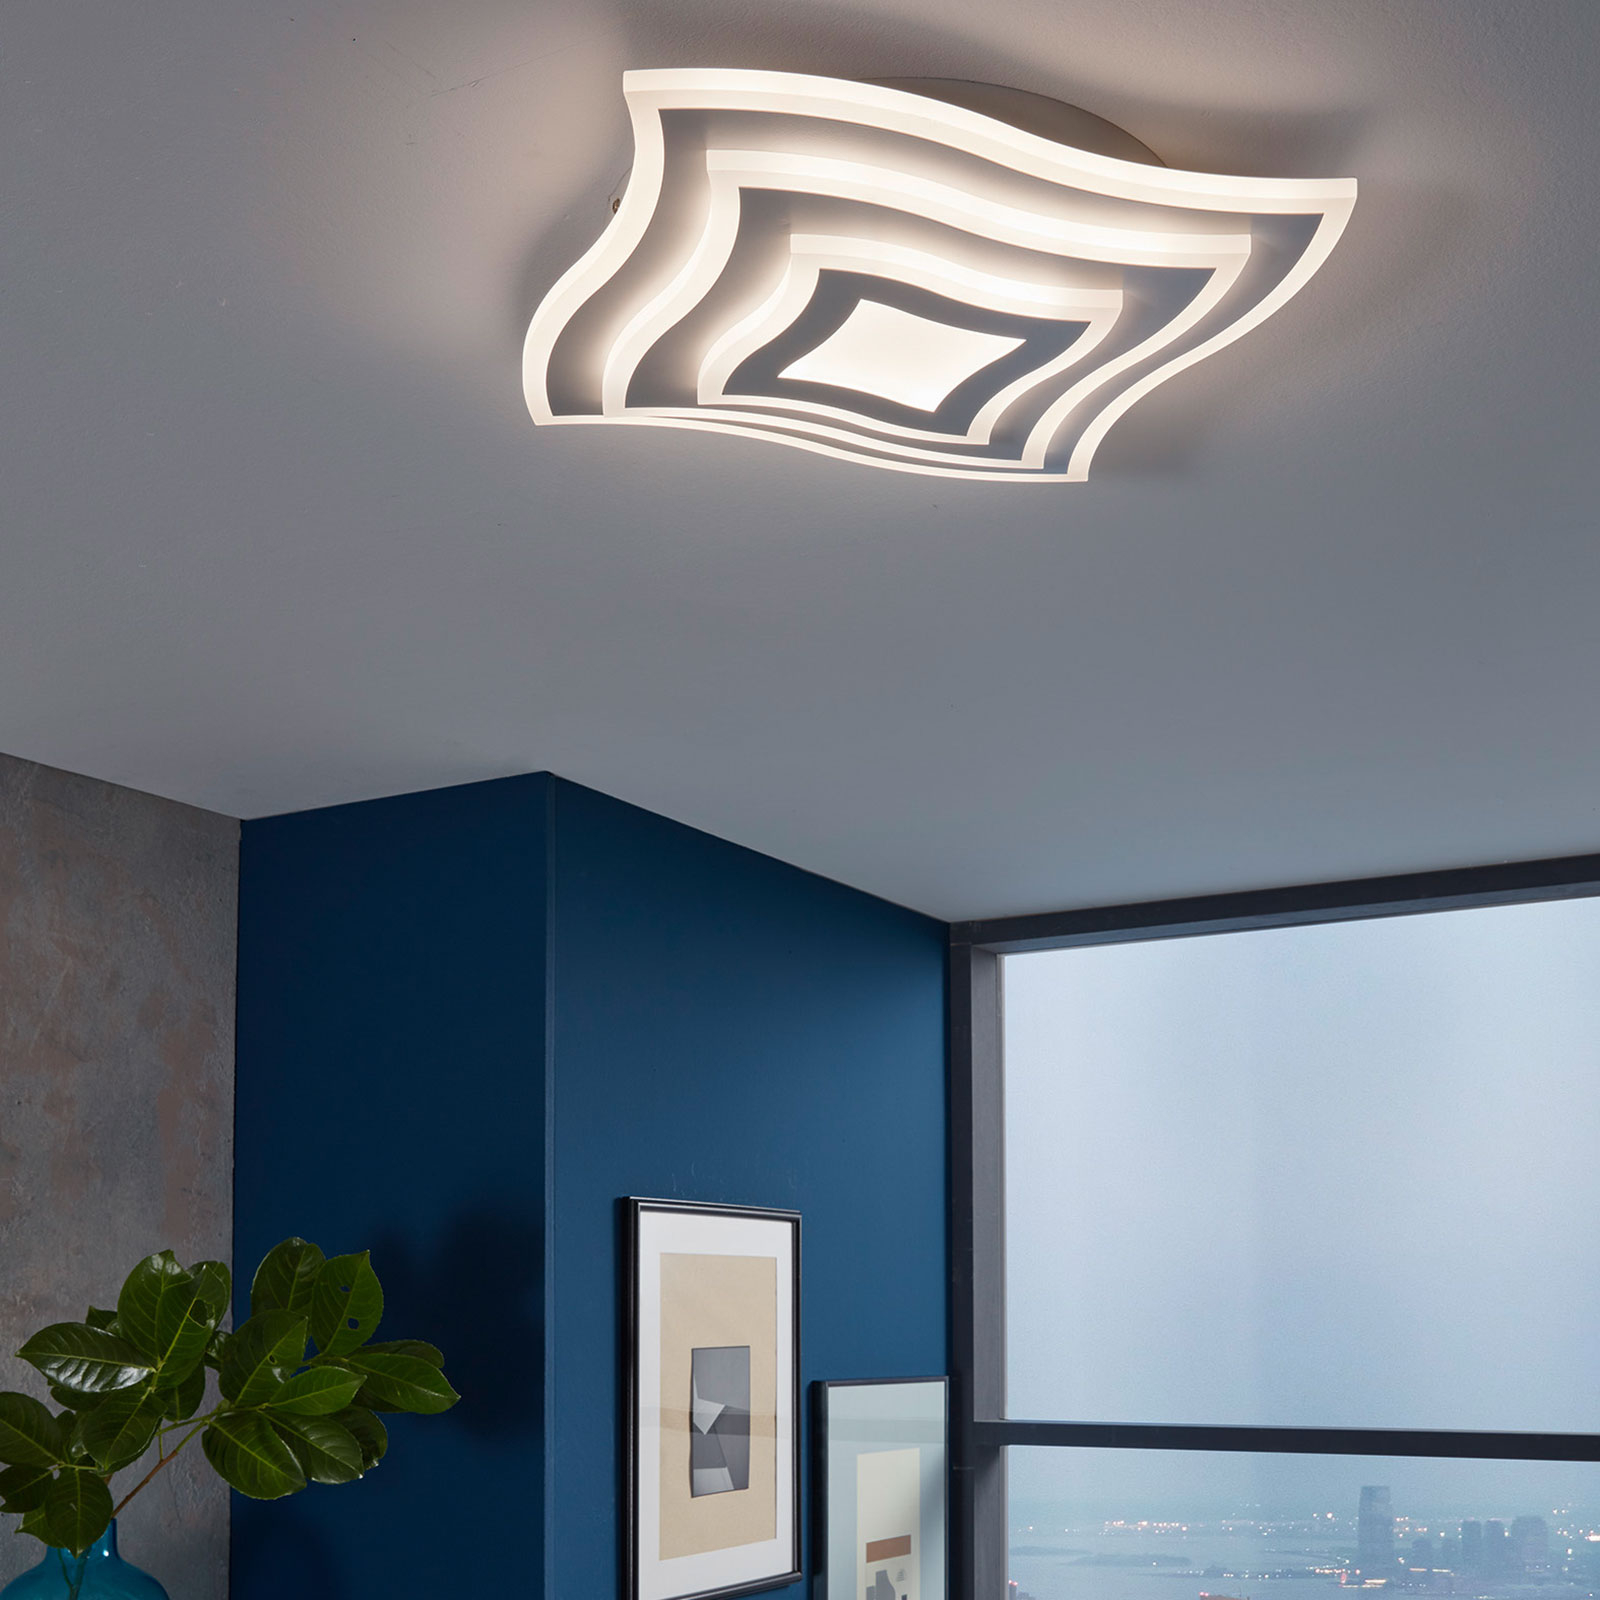 LED ceiling light Gorden with remote control, frame